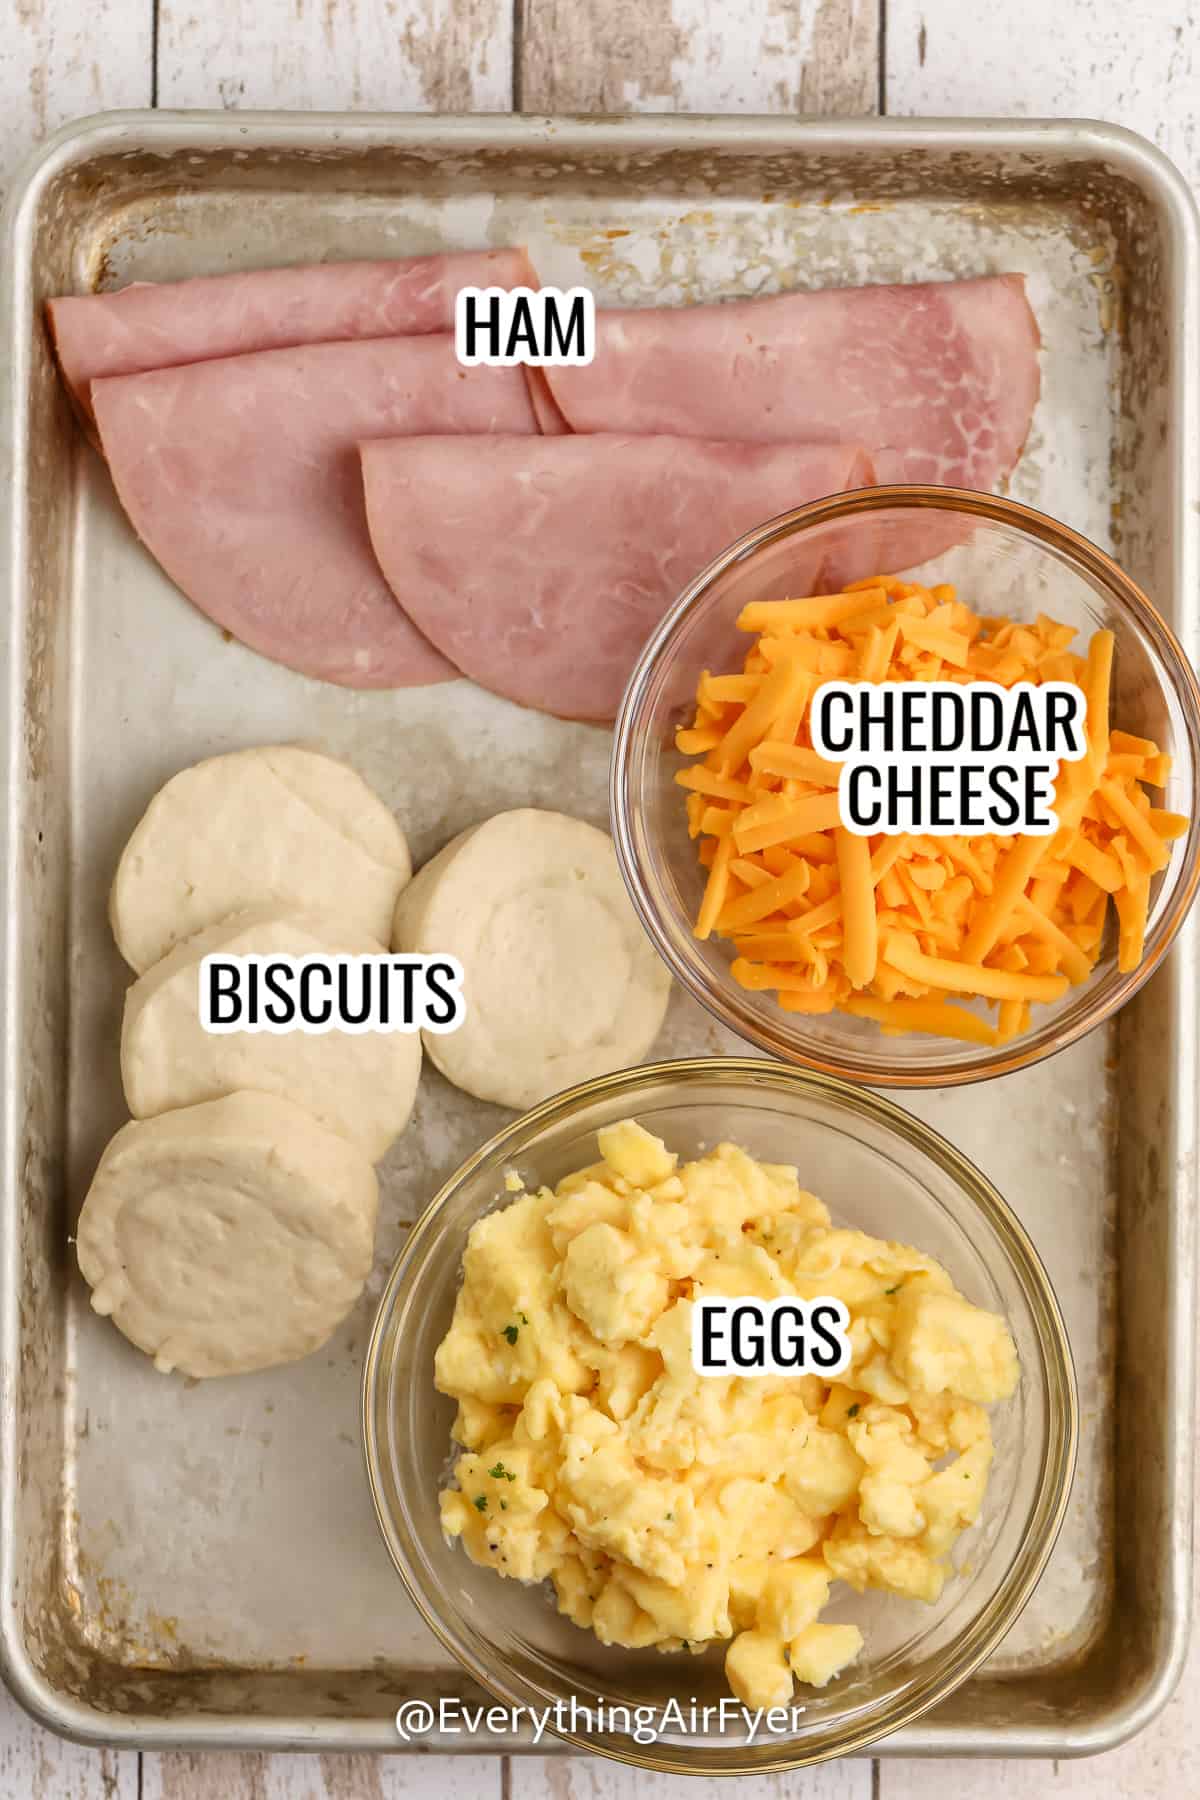 ingredients assembled to make breakfast sandwiches, including biscuits, cheese, ham, and eggs with labels